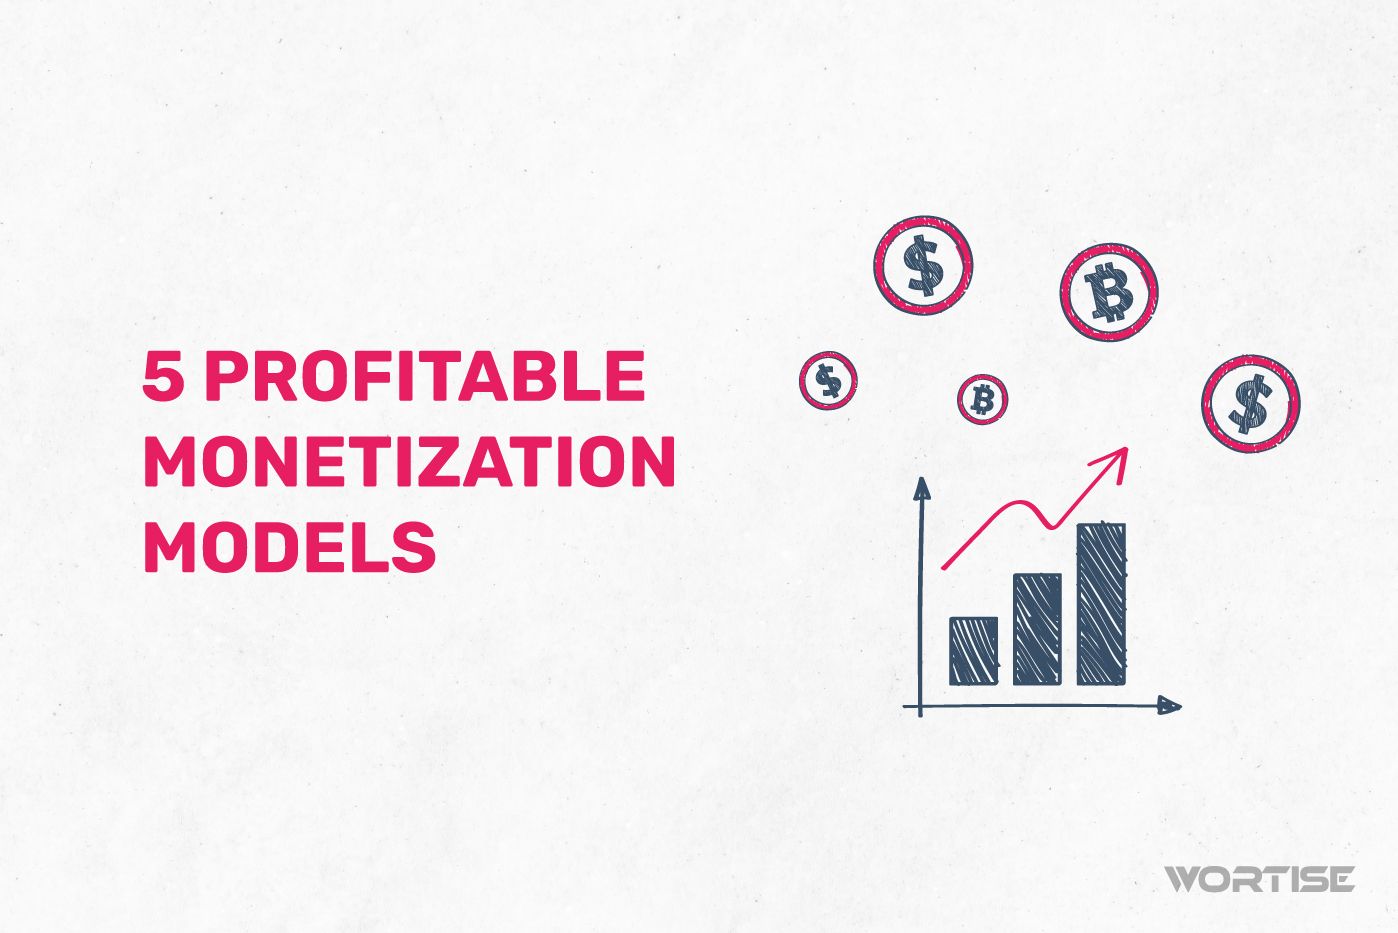 5 Profitable Monetization Models to Generate Income in Your App